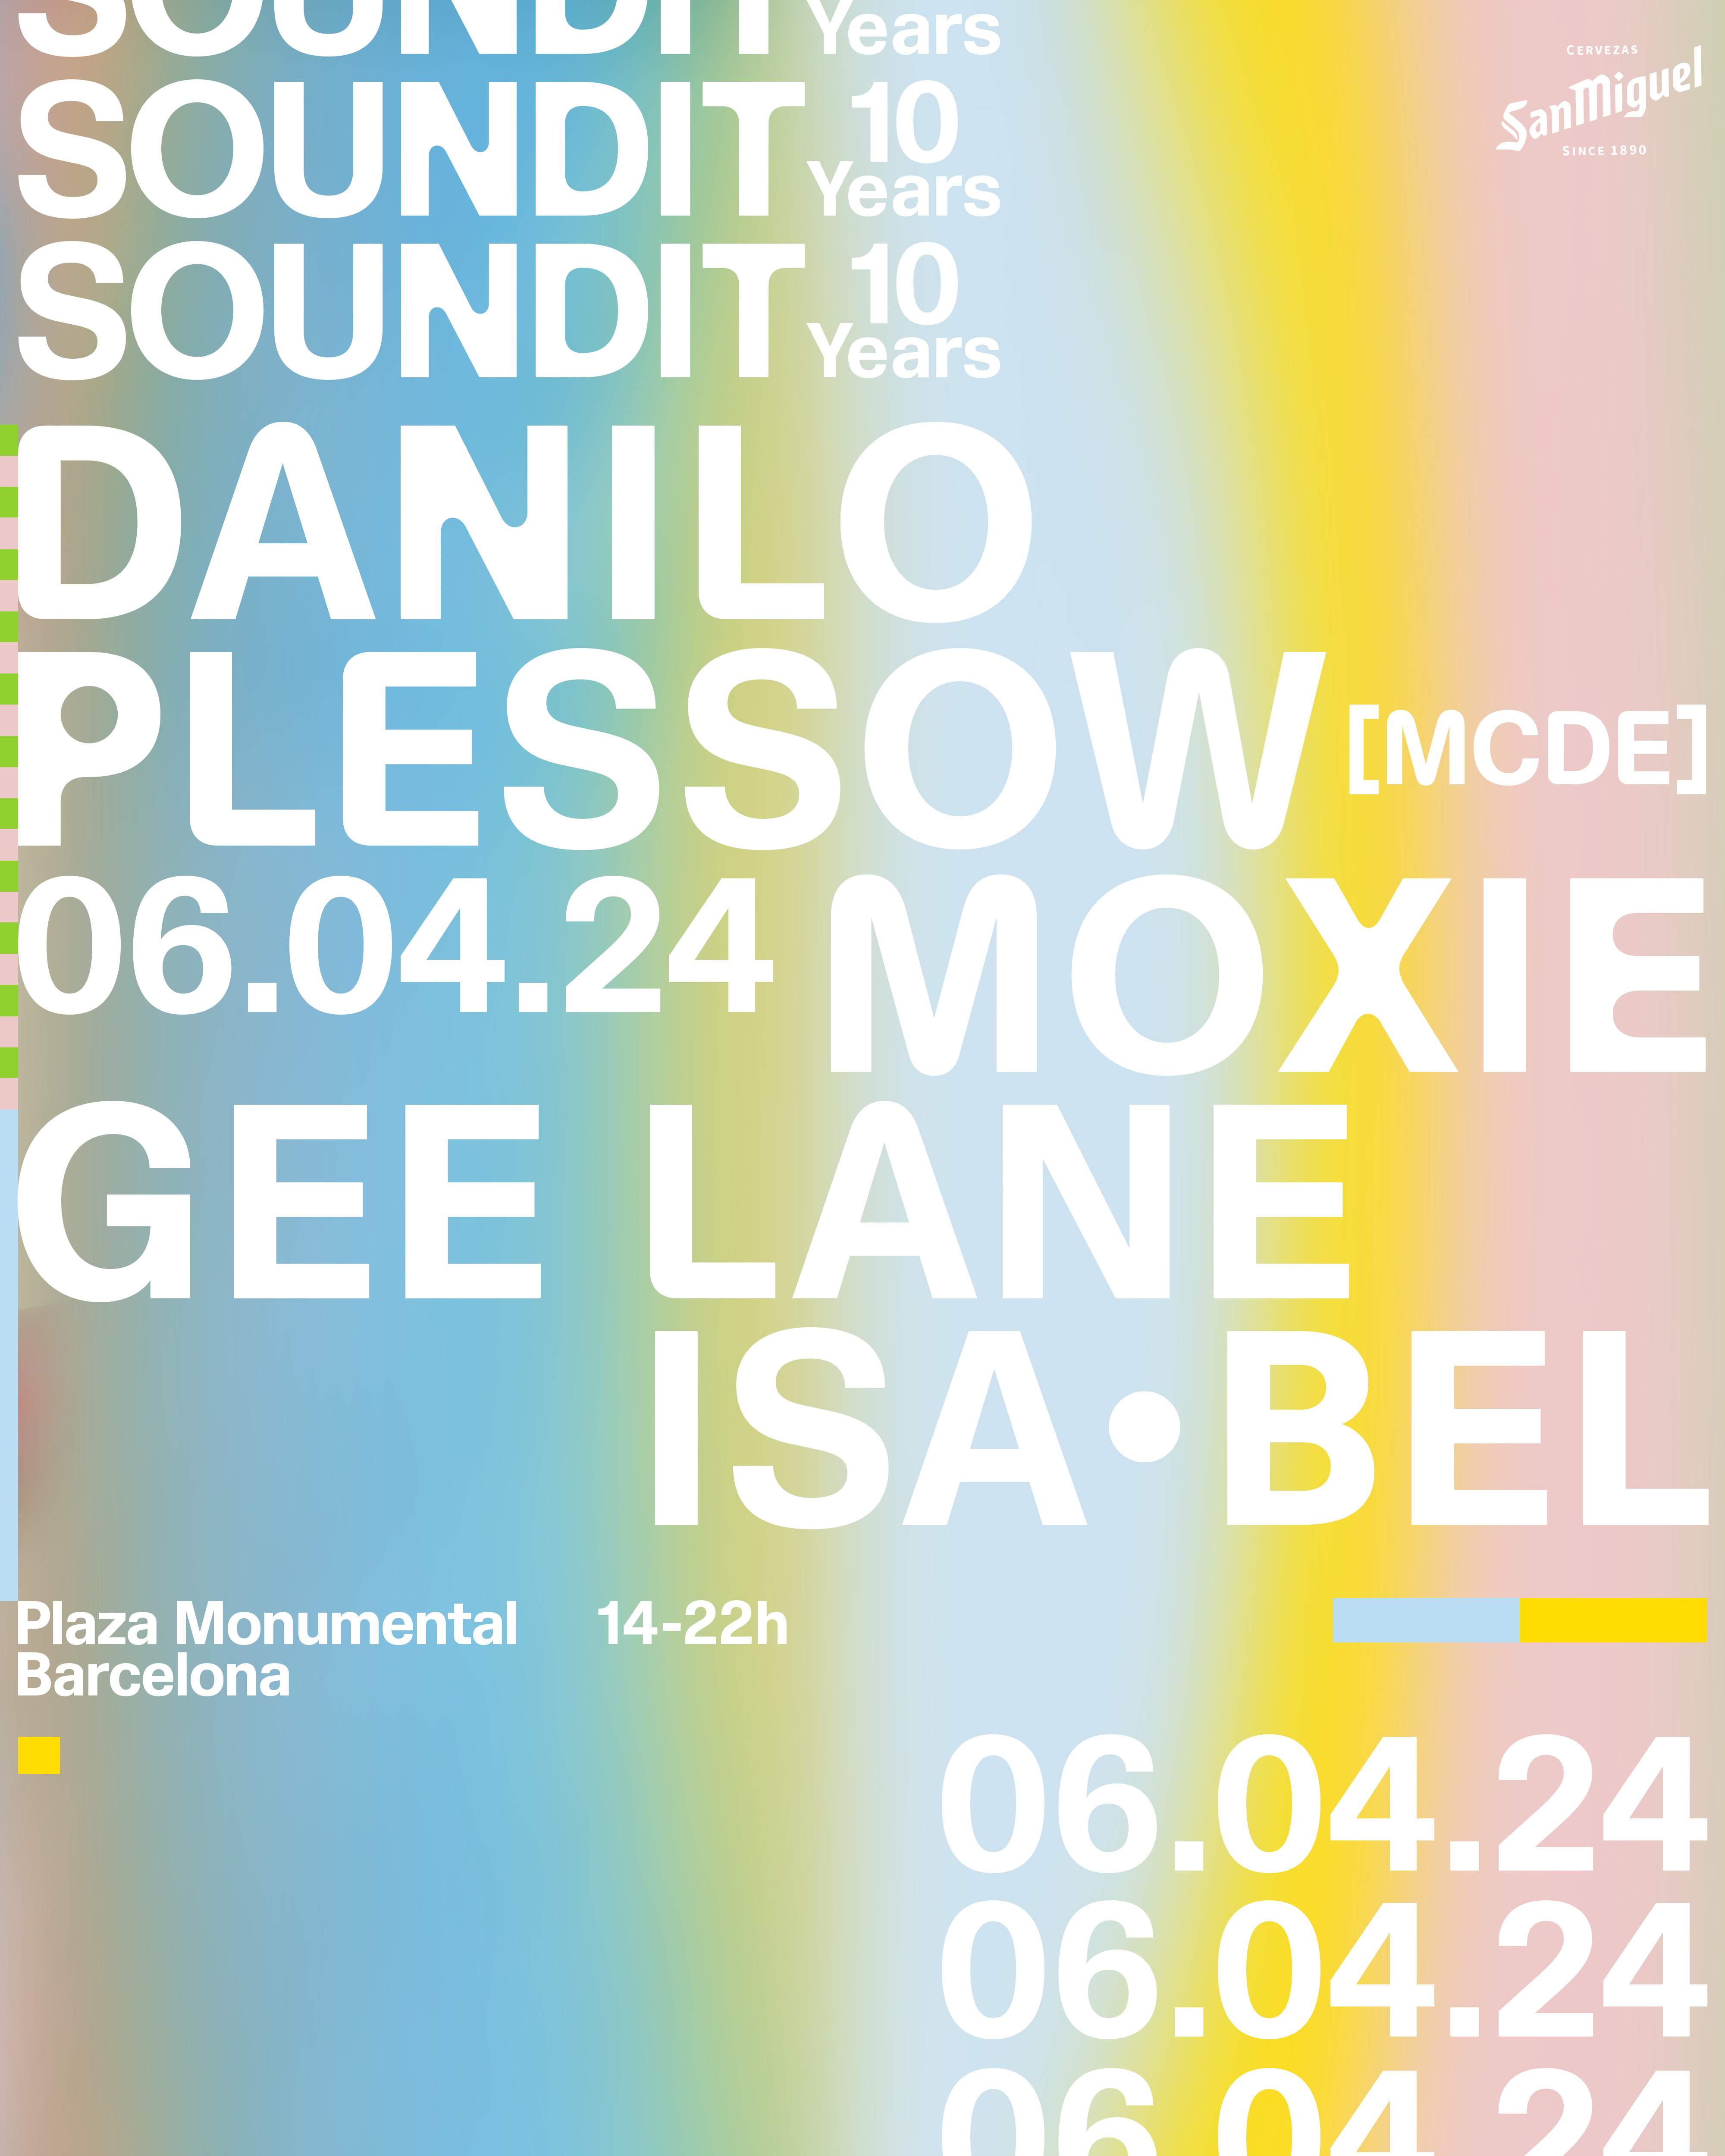 // SOLD OUT// SOUNDIT Plaza: Danilo Plessow (MCDE), Moxie, Gee Lane, Isa·bel - Página trasera